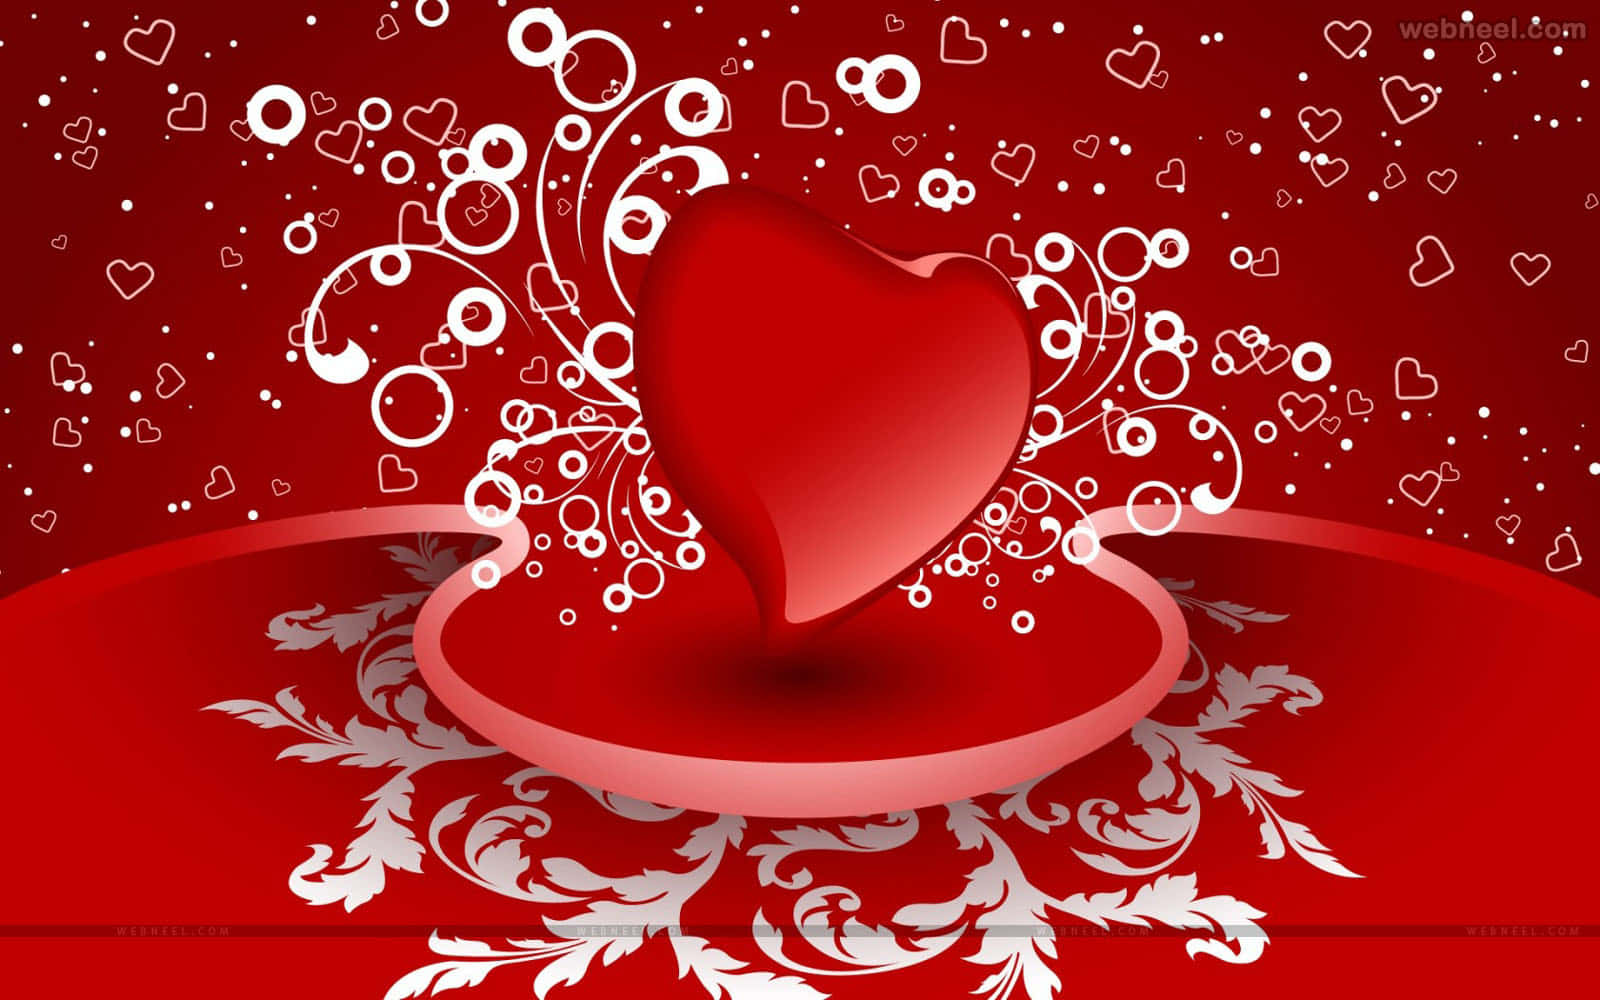 Image A Bright Red Heart, Perfect For Love And Romance Wallpaper